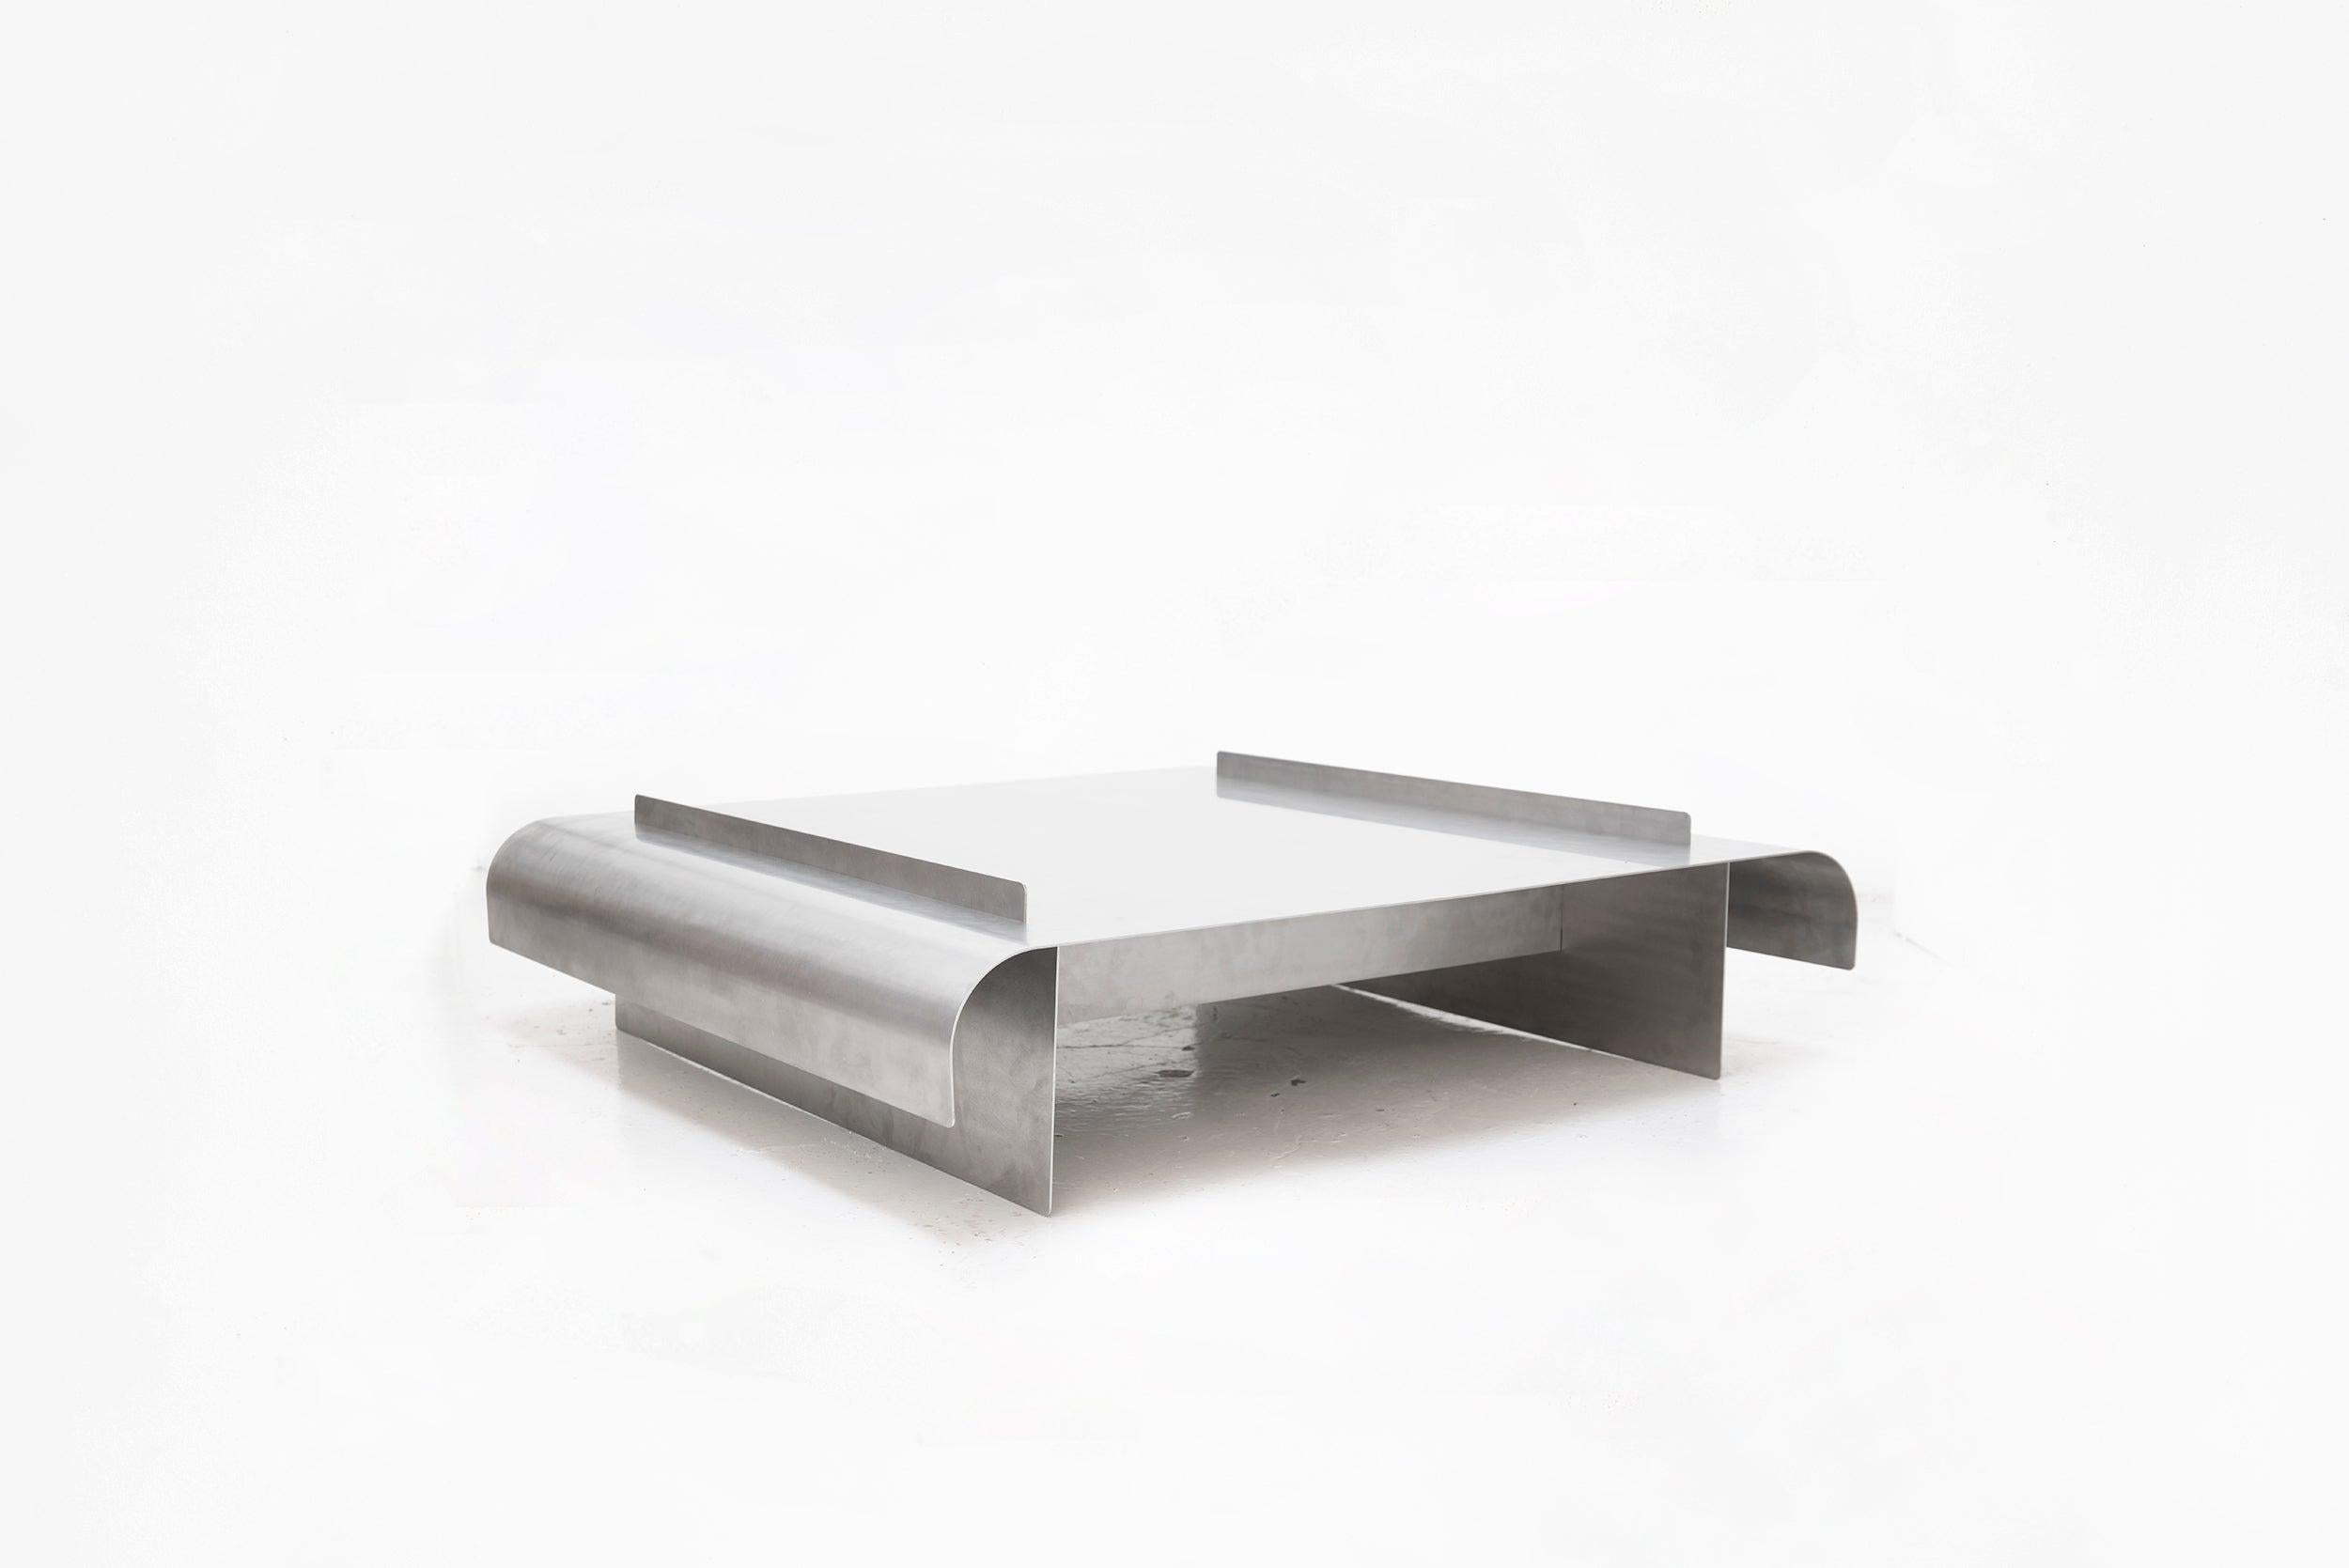 Maria Tyakina
Bend table low
Produced exclusively for Side Gallery The Netherlands, 2019
Stainless steel, hand brushed.

Measurements: 89 x 89 x 24 H cm 35 x 35 x 9.44 H in
Edition Numbered edition

Biography
Navigating between art and